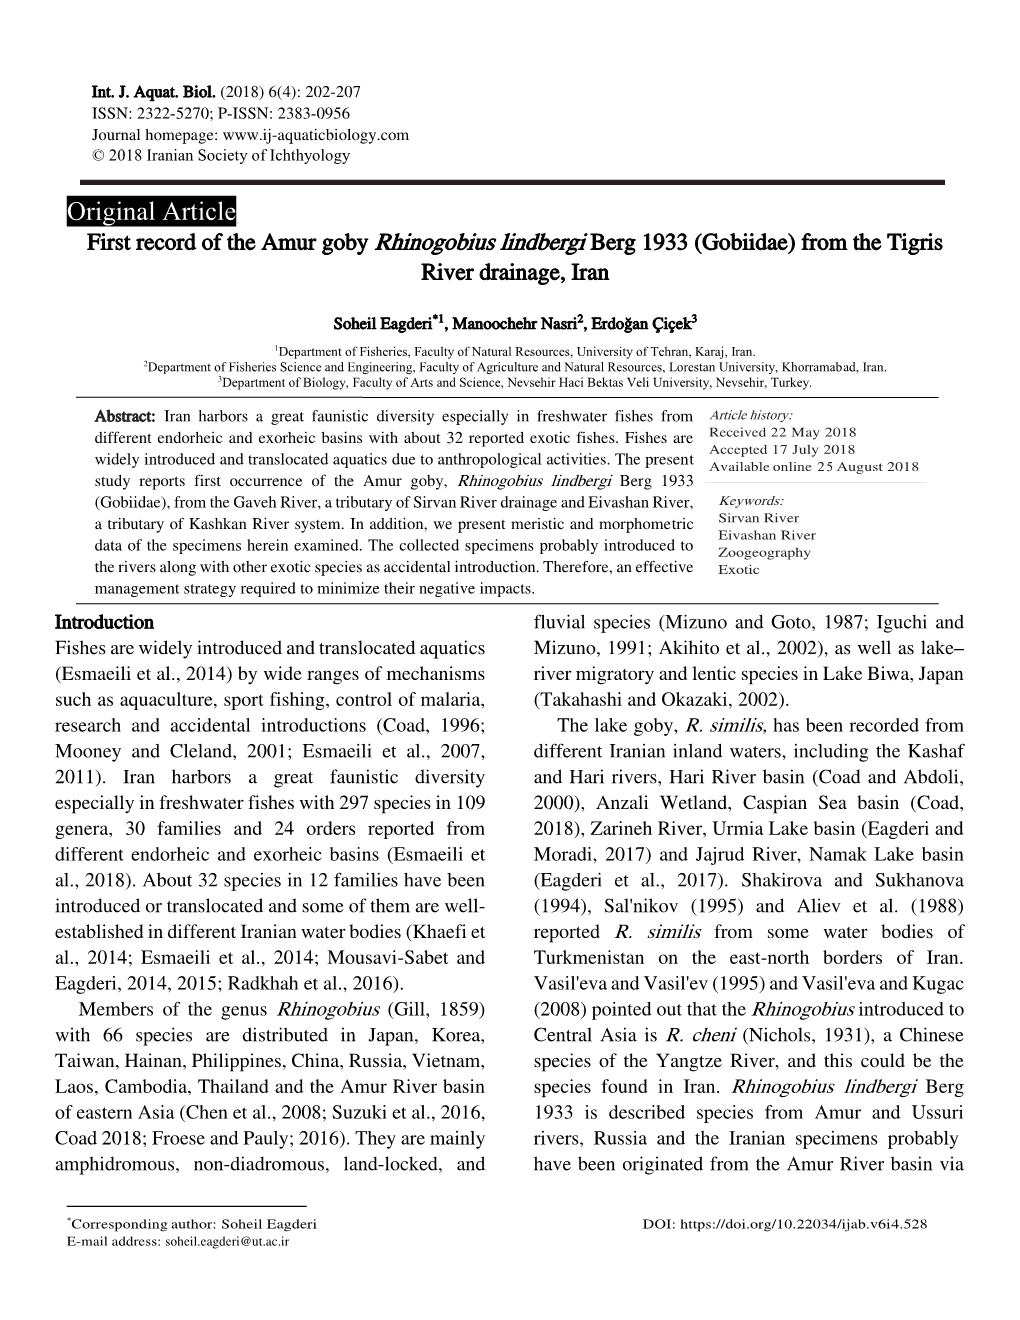 Original Article First Record of the Amur Goby Rhinogobius Lindbergi Berg 1933 (Gobiidae) from the Tigris River Drainage, Iran